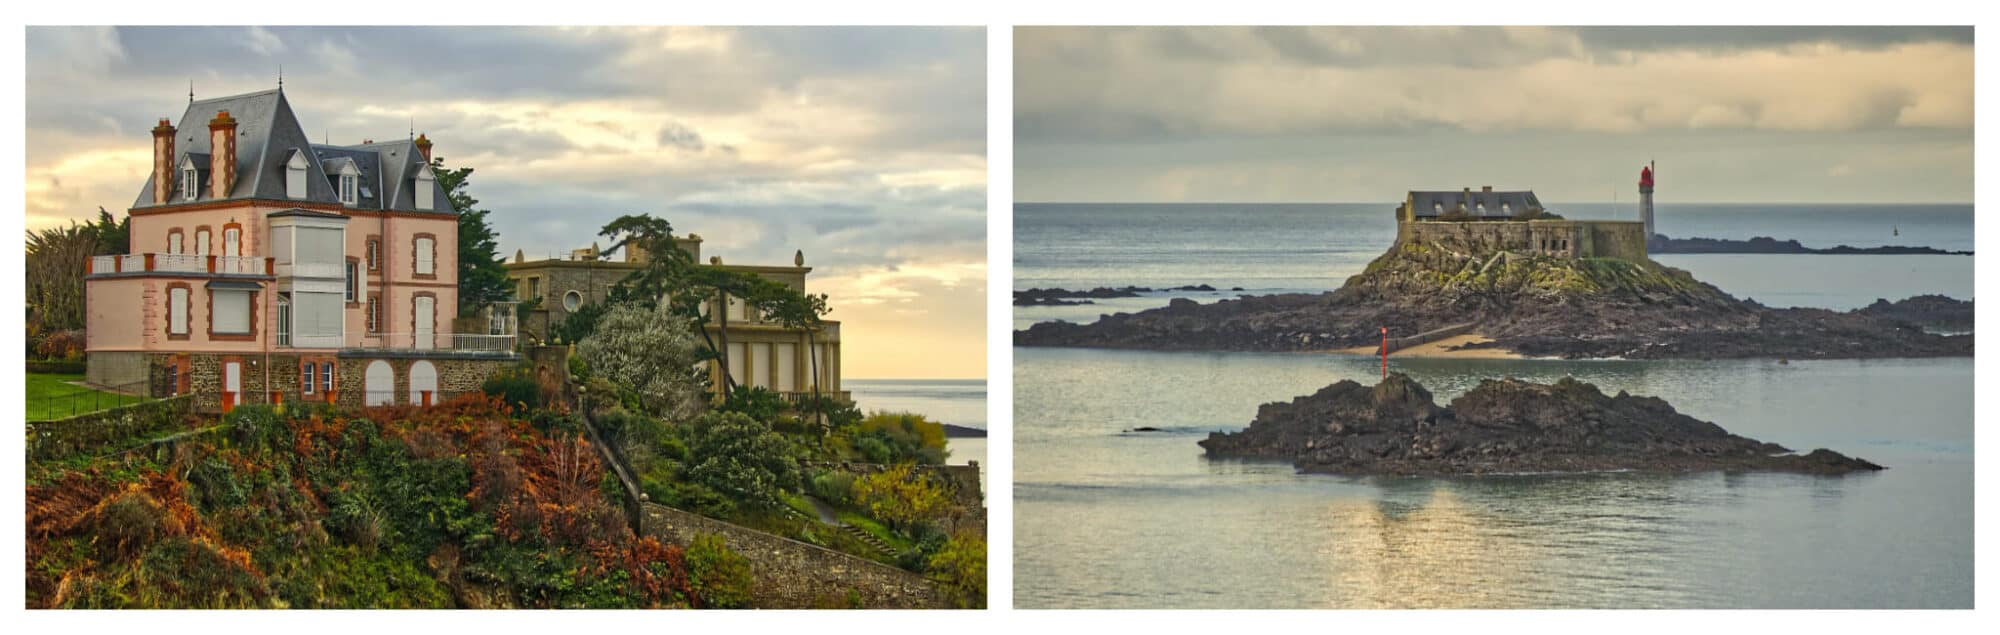 Left: A peach-colored house by Dinard's coast full of greeneries; Right: A tiny island in Dinard's coast with a small castle. 